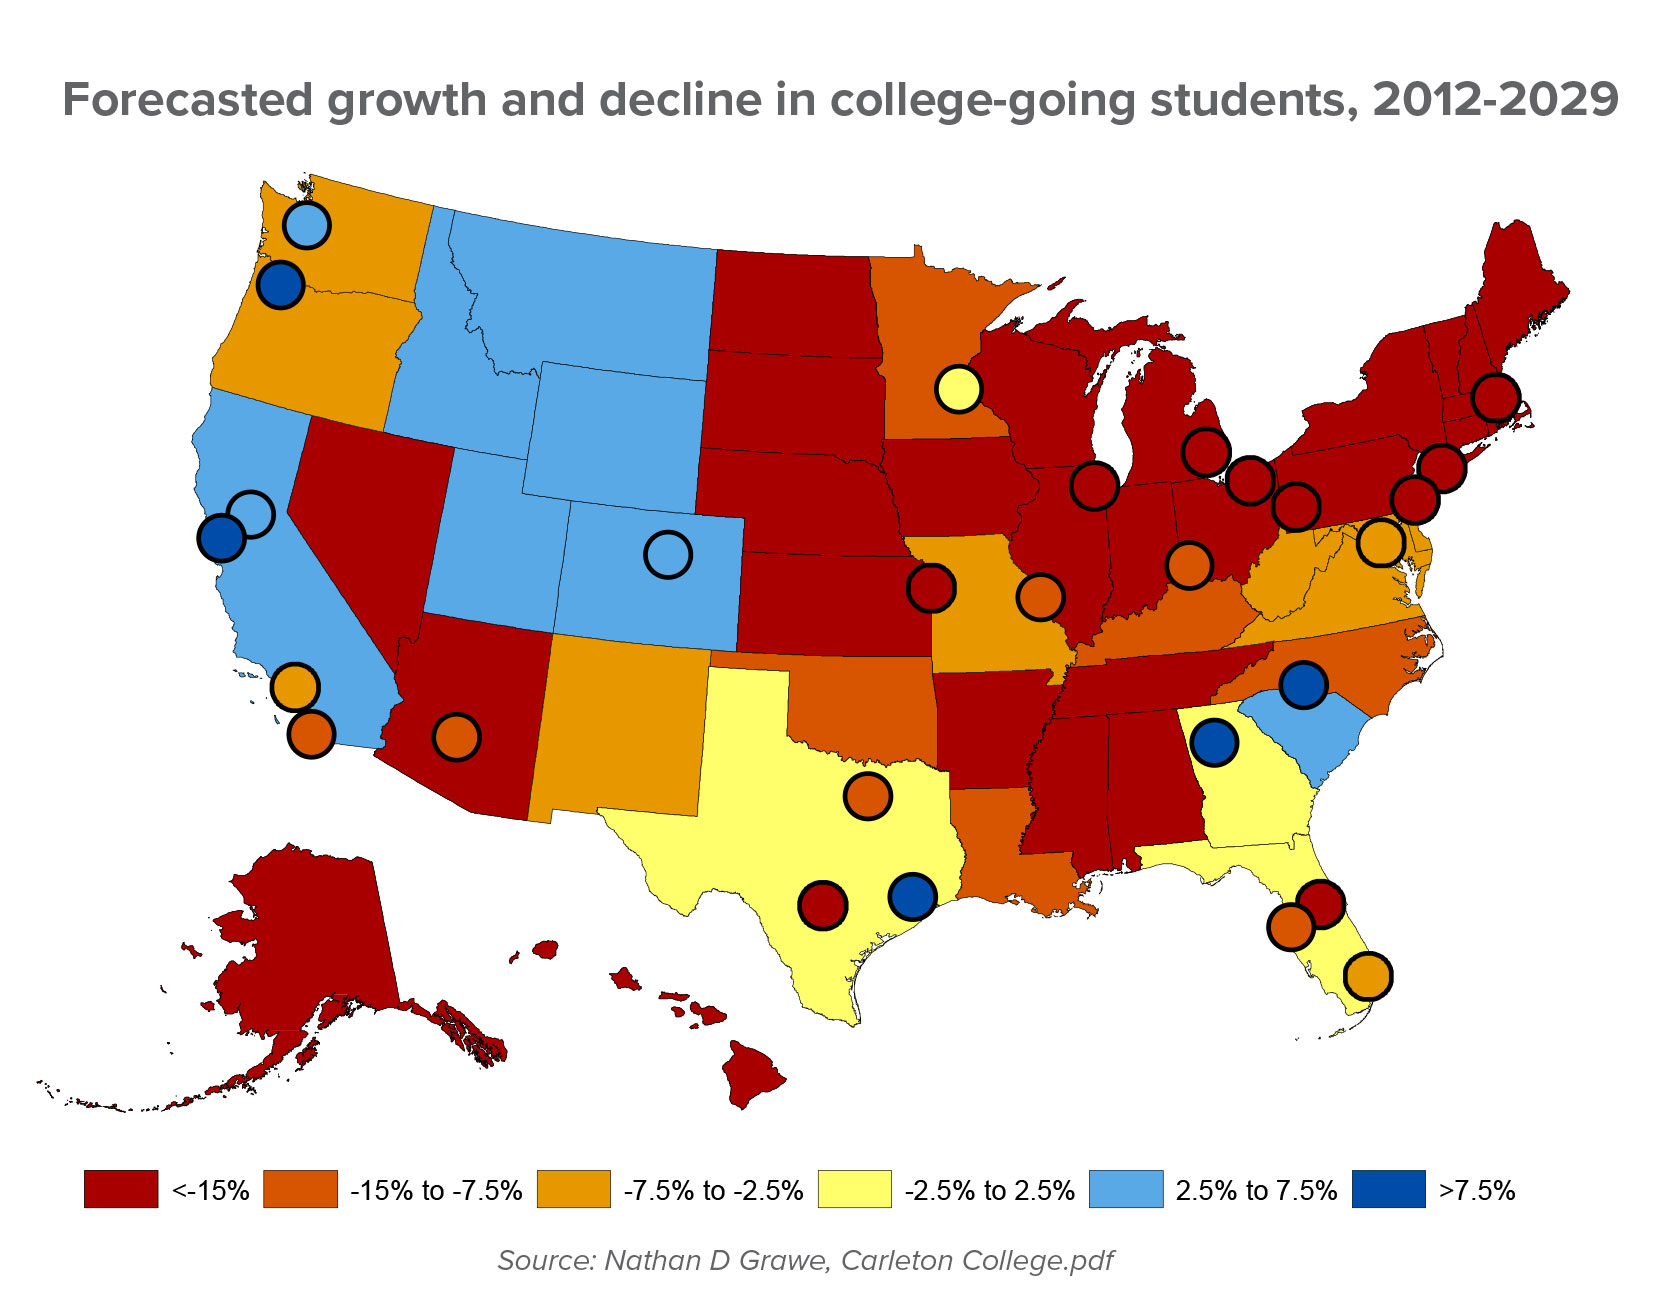 Forecasted growth and decline in college-going students, 2012-2029 